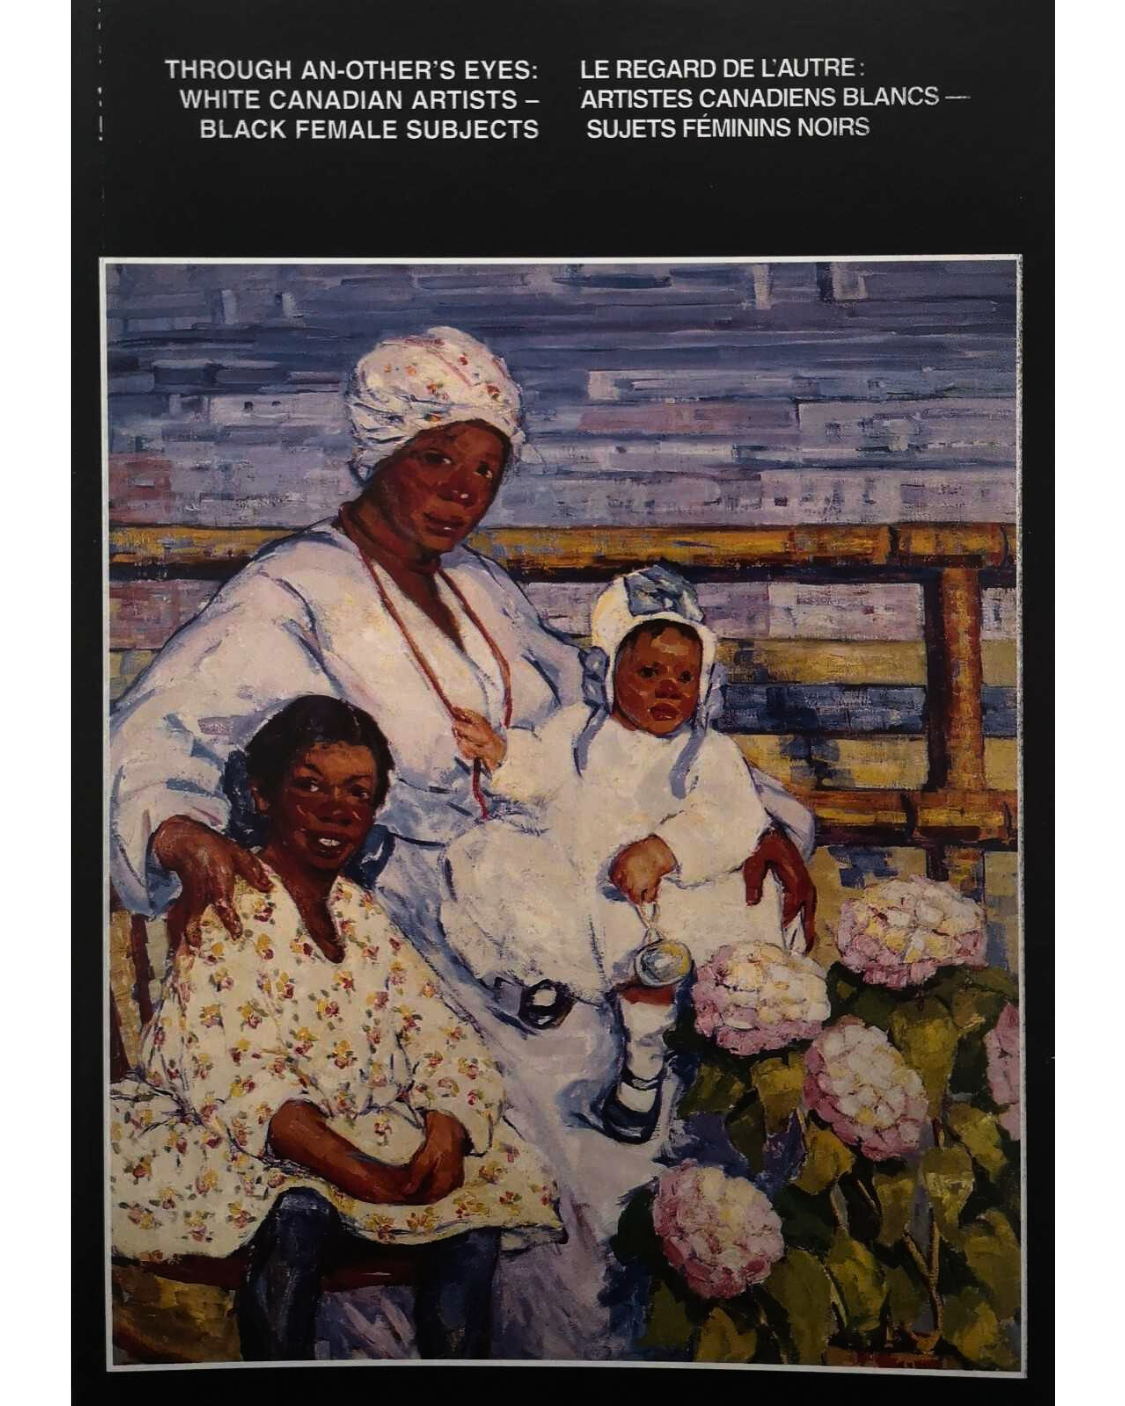 RMG Through An-other’s Eyes: White Canadian Artists - Black Female Subjects